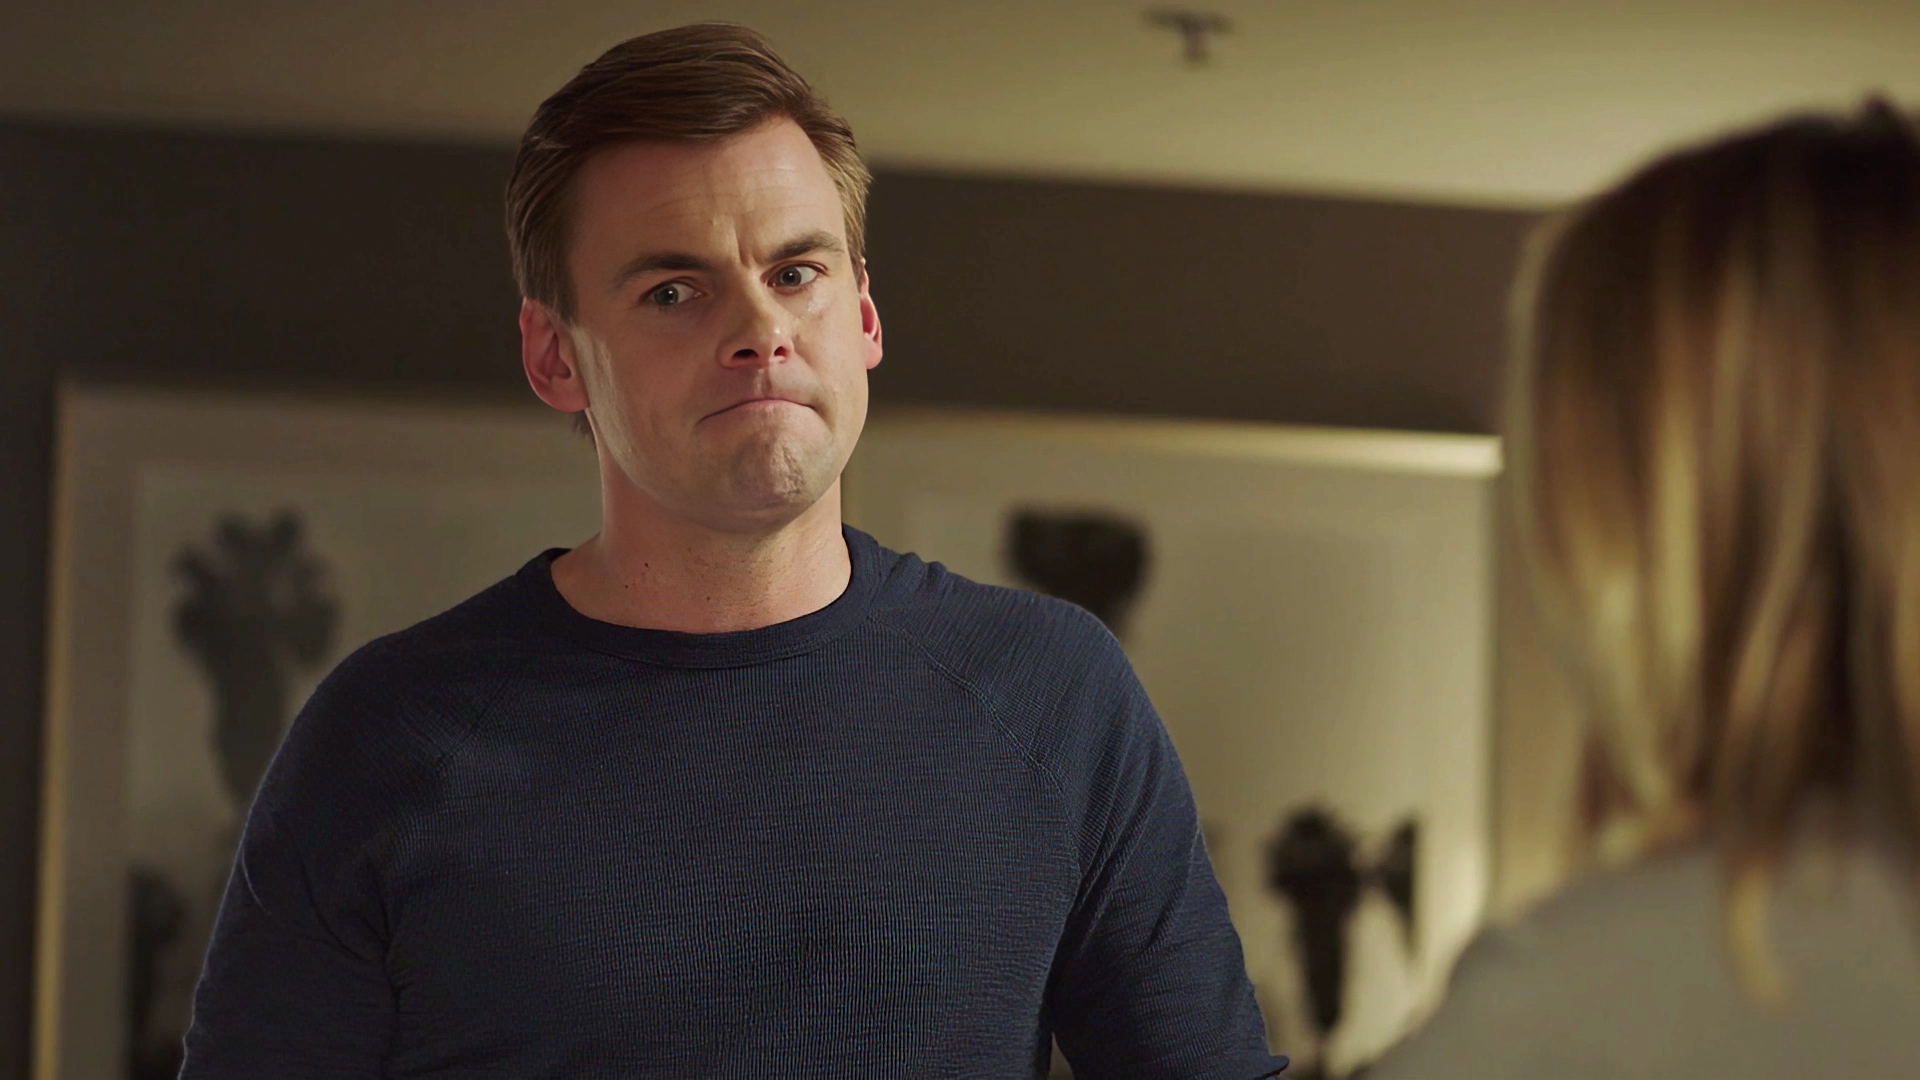 Tommy Dewey as Tommy tries to console the wife of his broadcasting partner, Tug, in this scene edited by Todd Bishop for the CW's Now We're Talking.